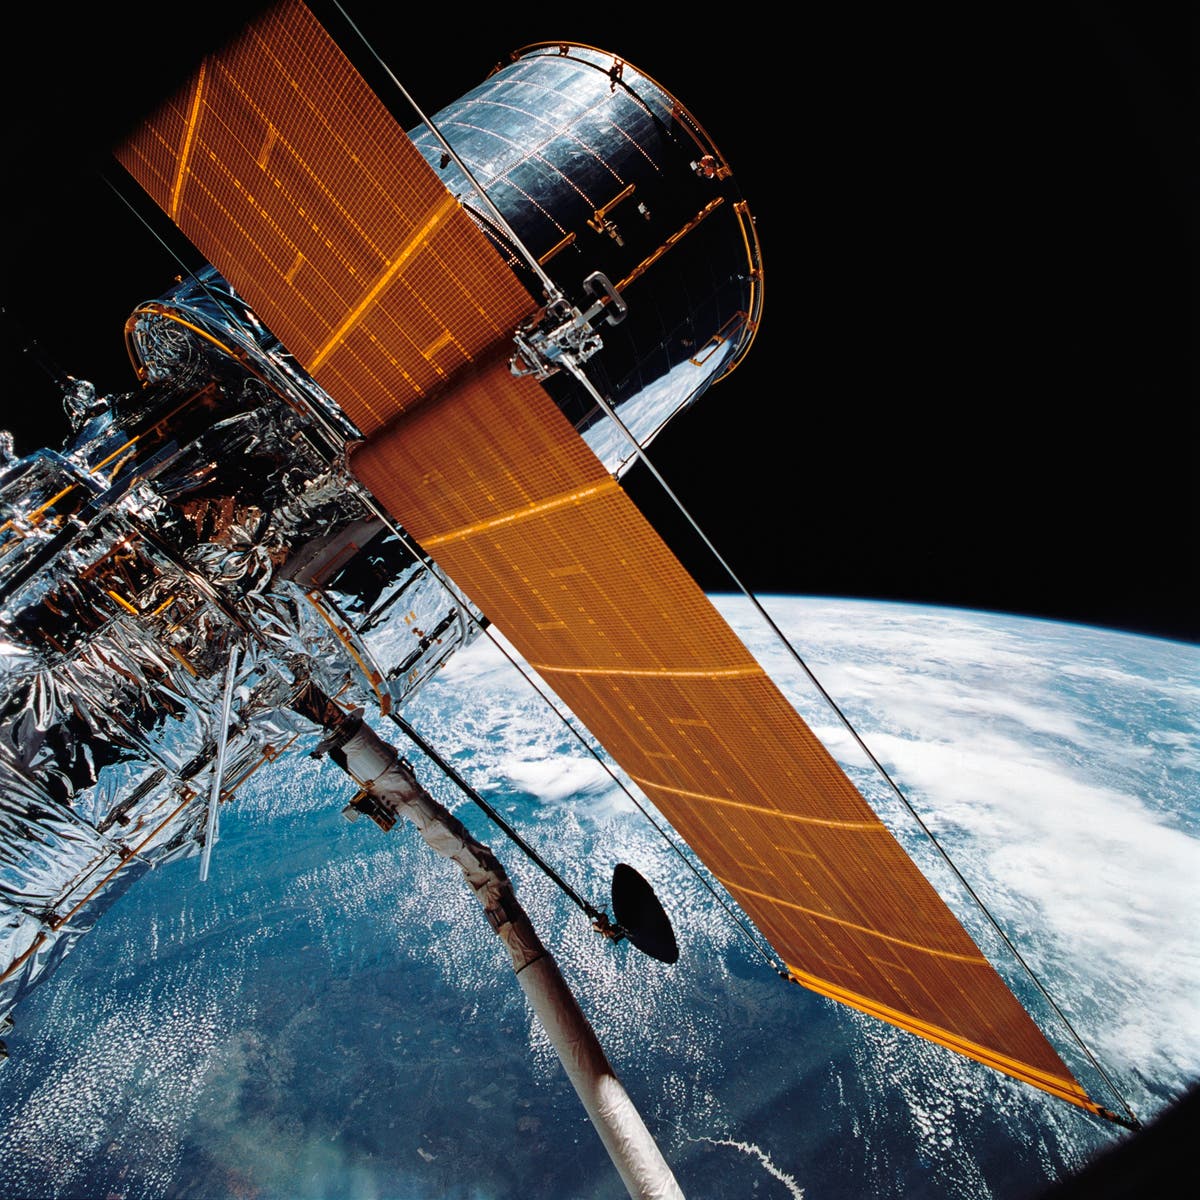 Hubble Space Telescope fixed after month of no science